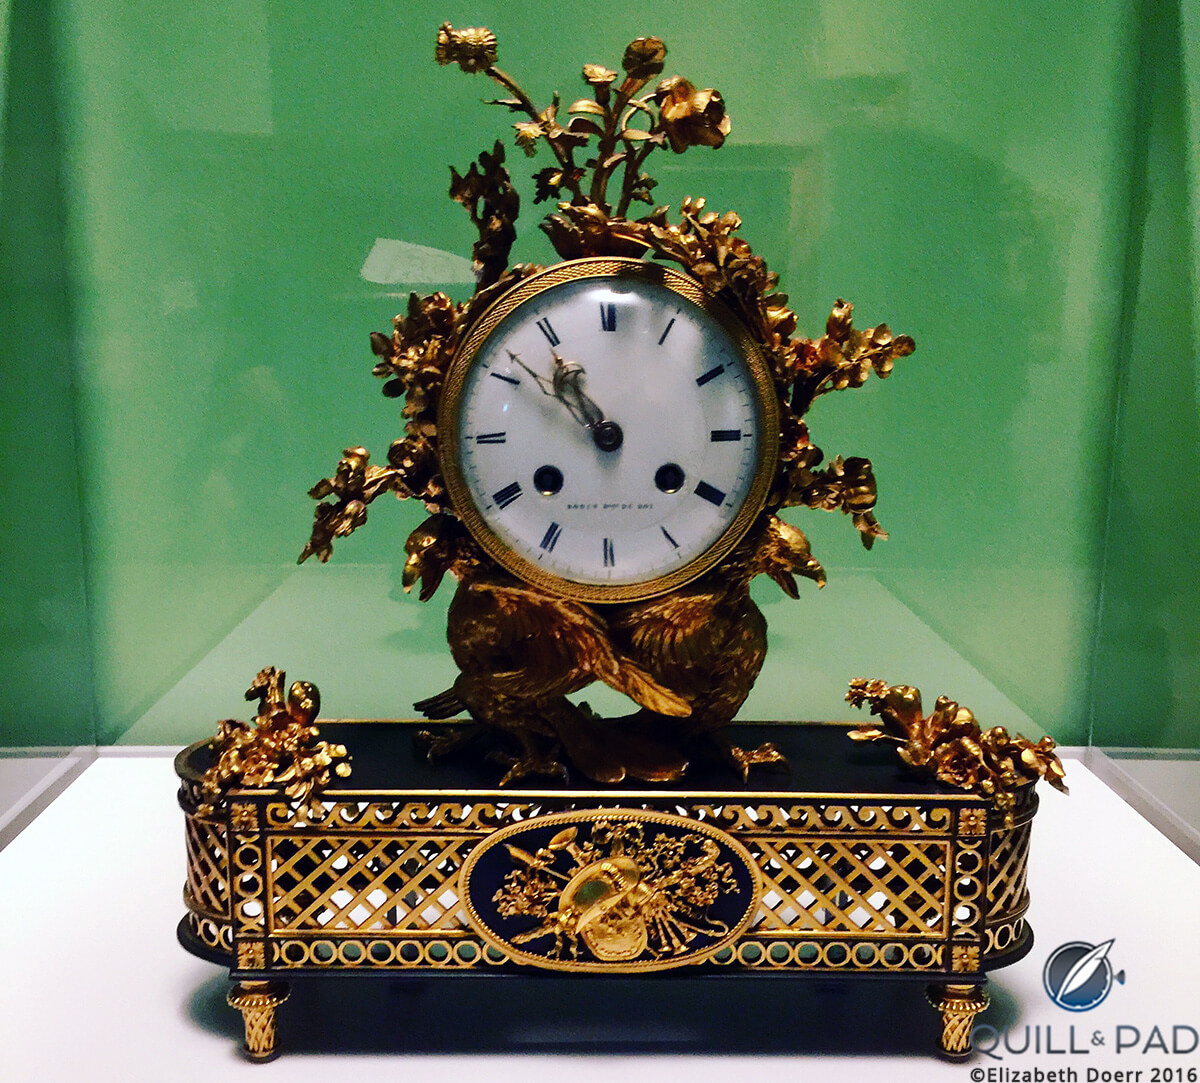 A clock from Versailles on display at the “Marie-Antoinette, a Queen in Versailles” exhibition at Mori Arts Center, which runs through February 26, 2017